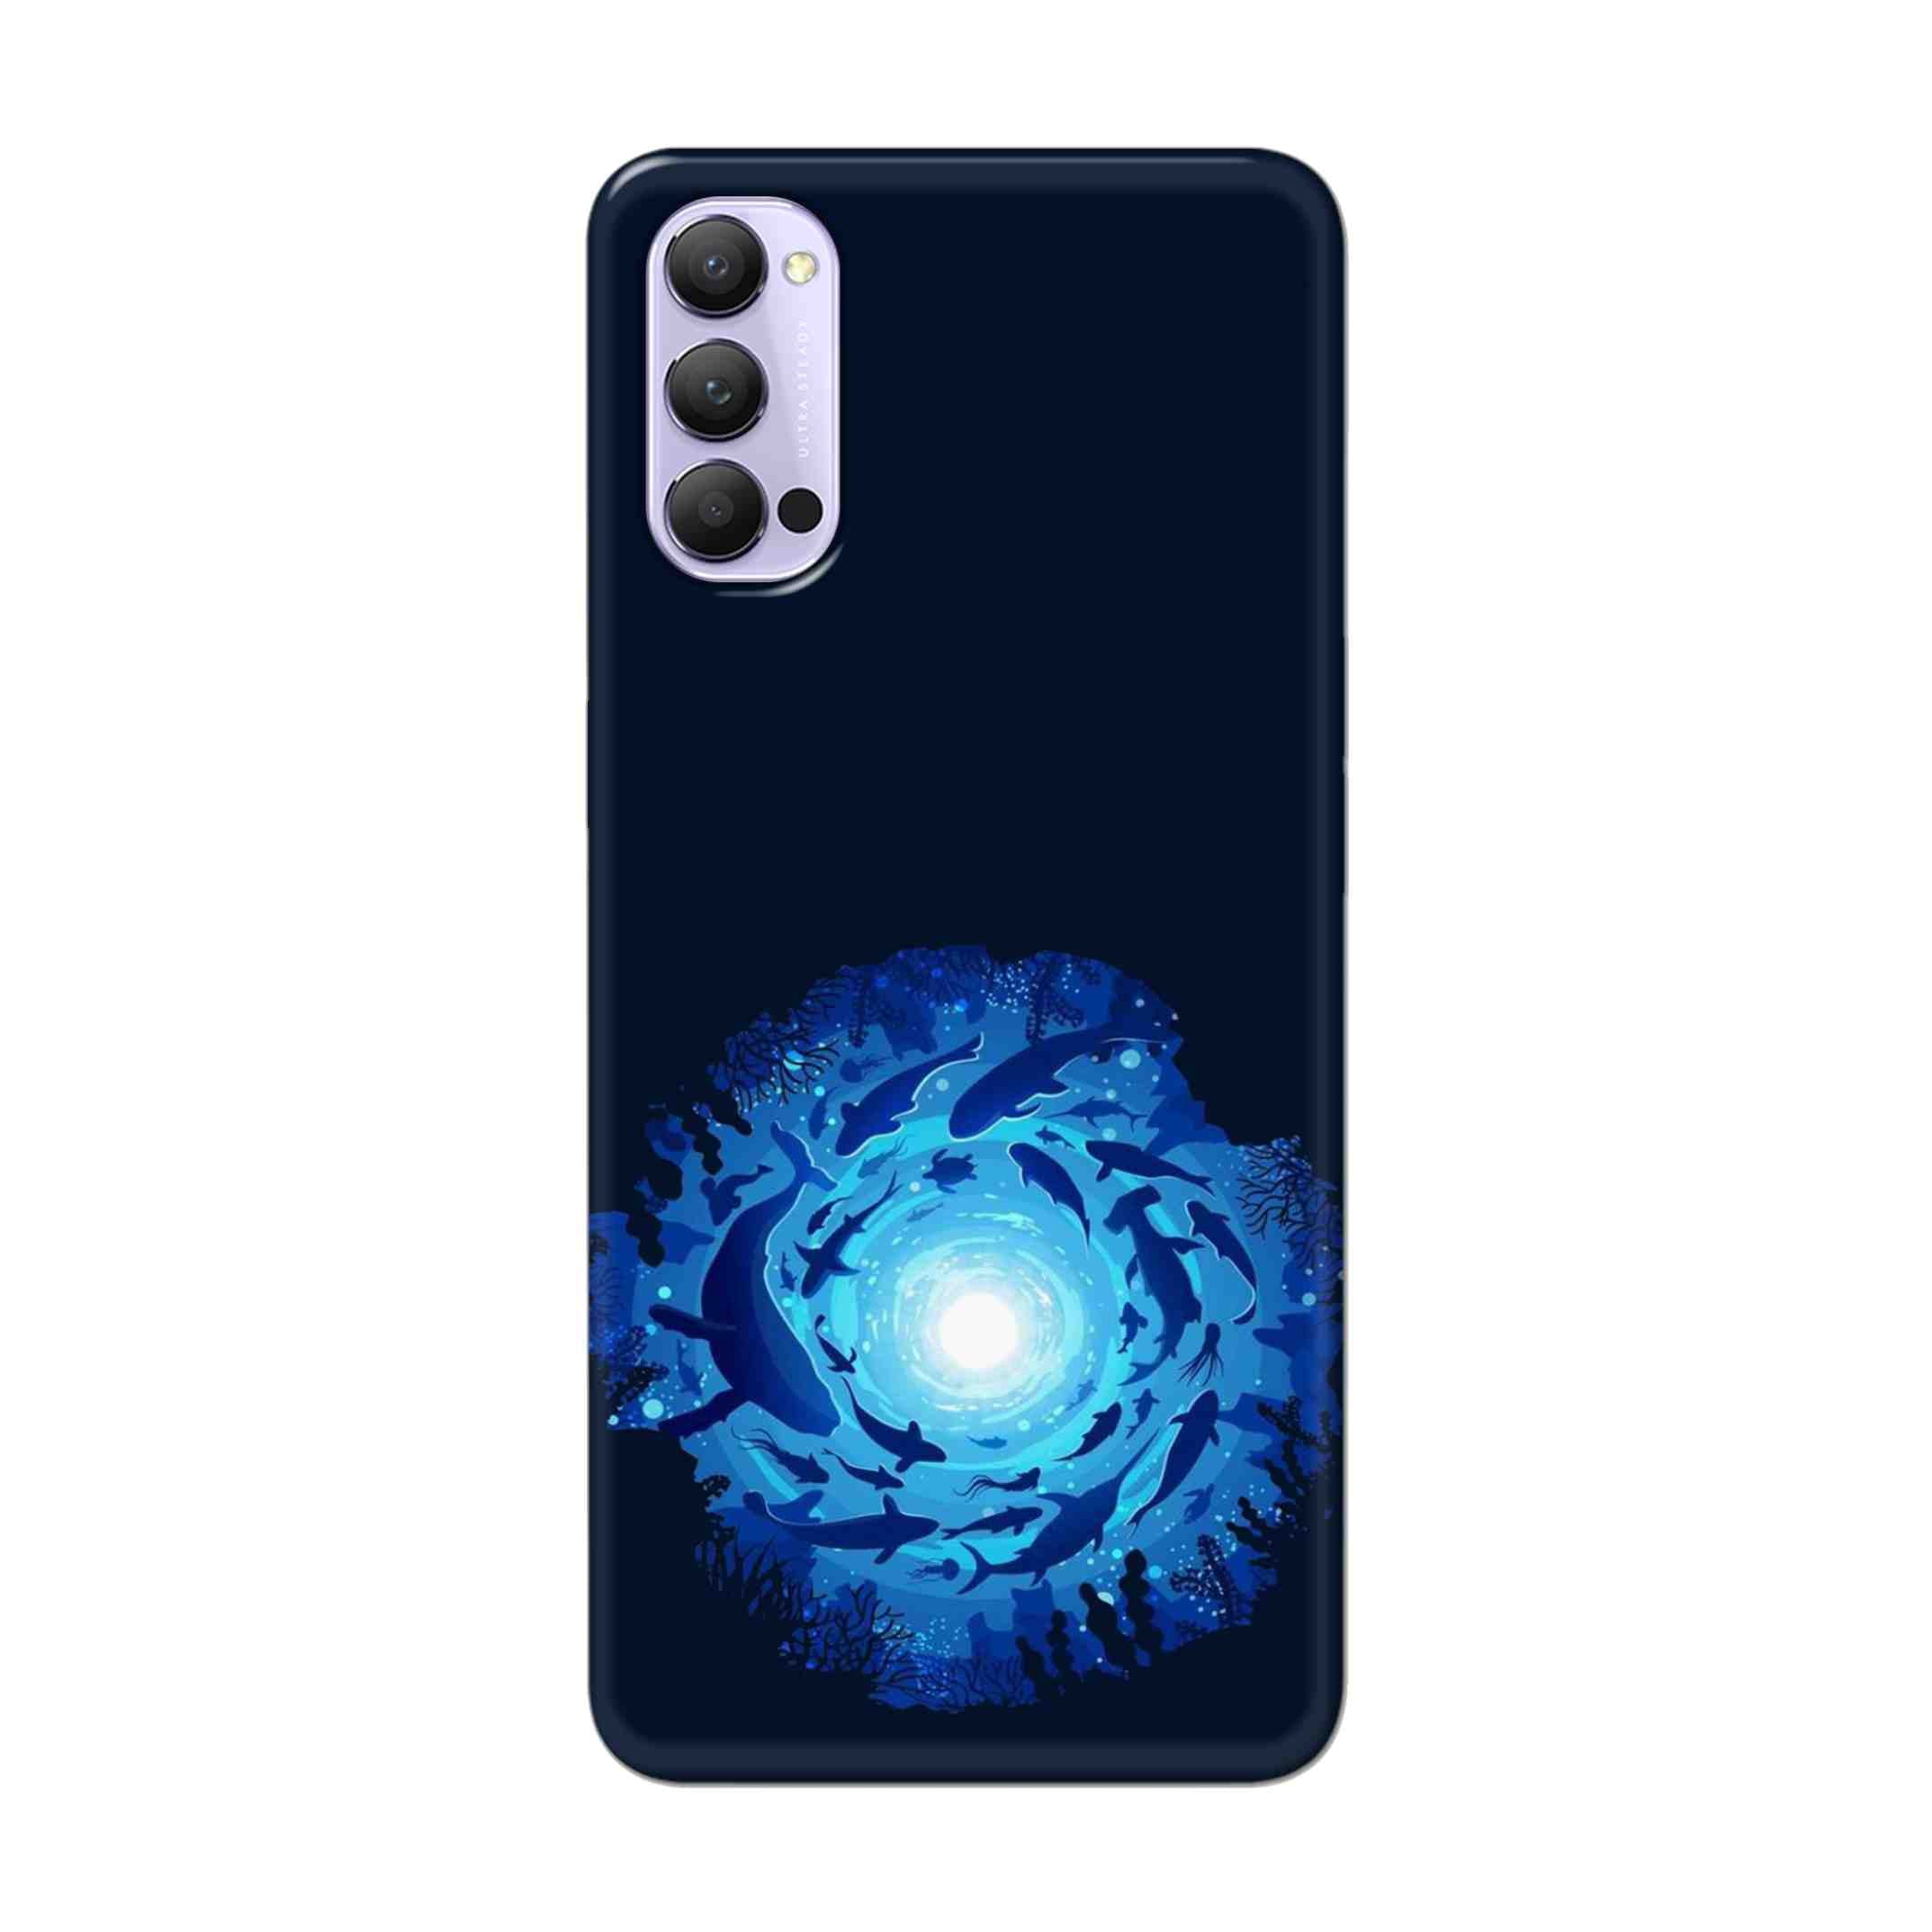 Buy Blue Whale Hard Back Mobile Phone Case Cover For Oppo Reno 4 Pro Online